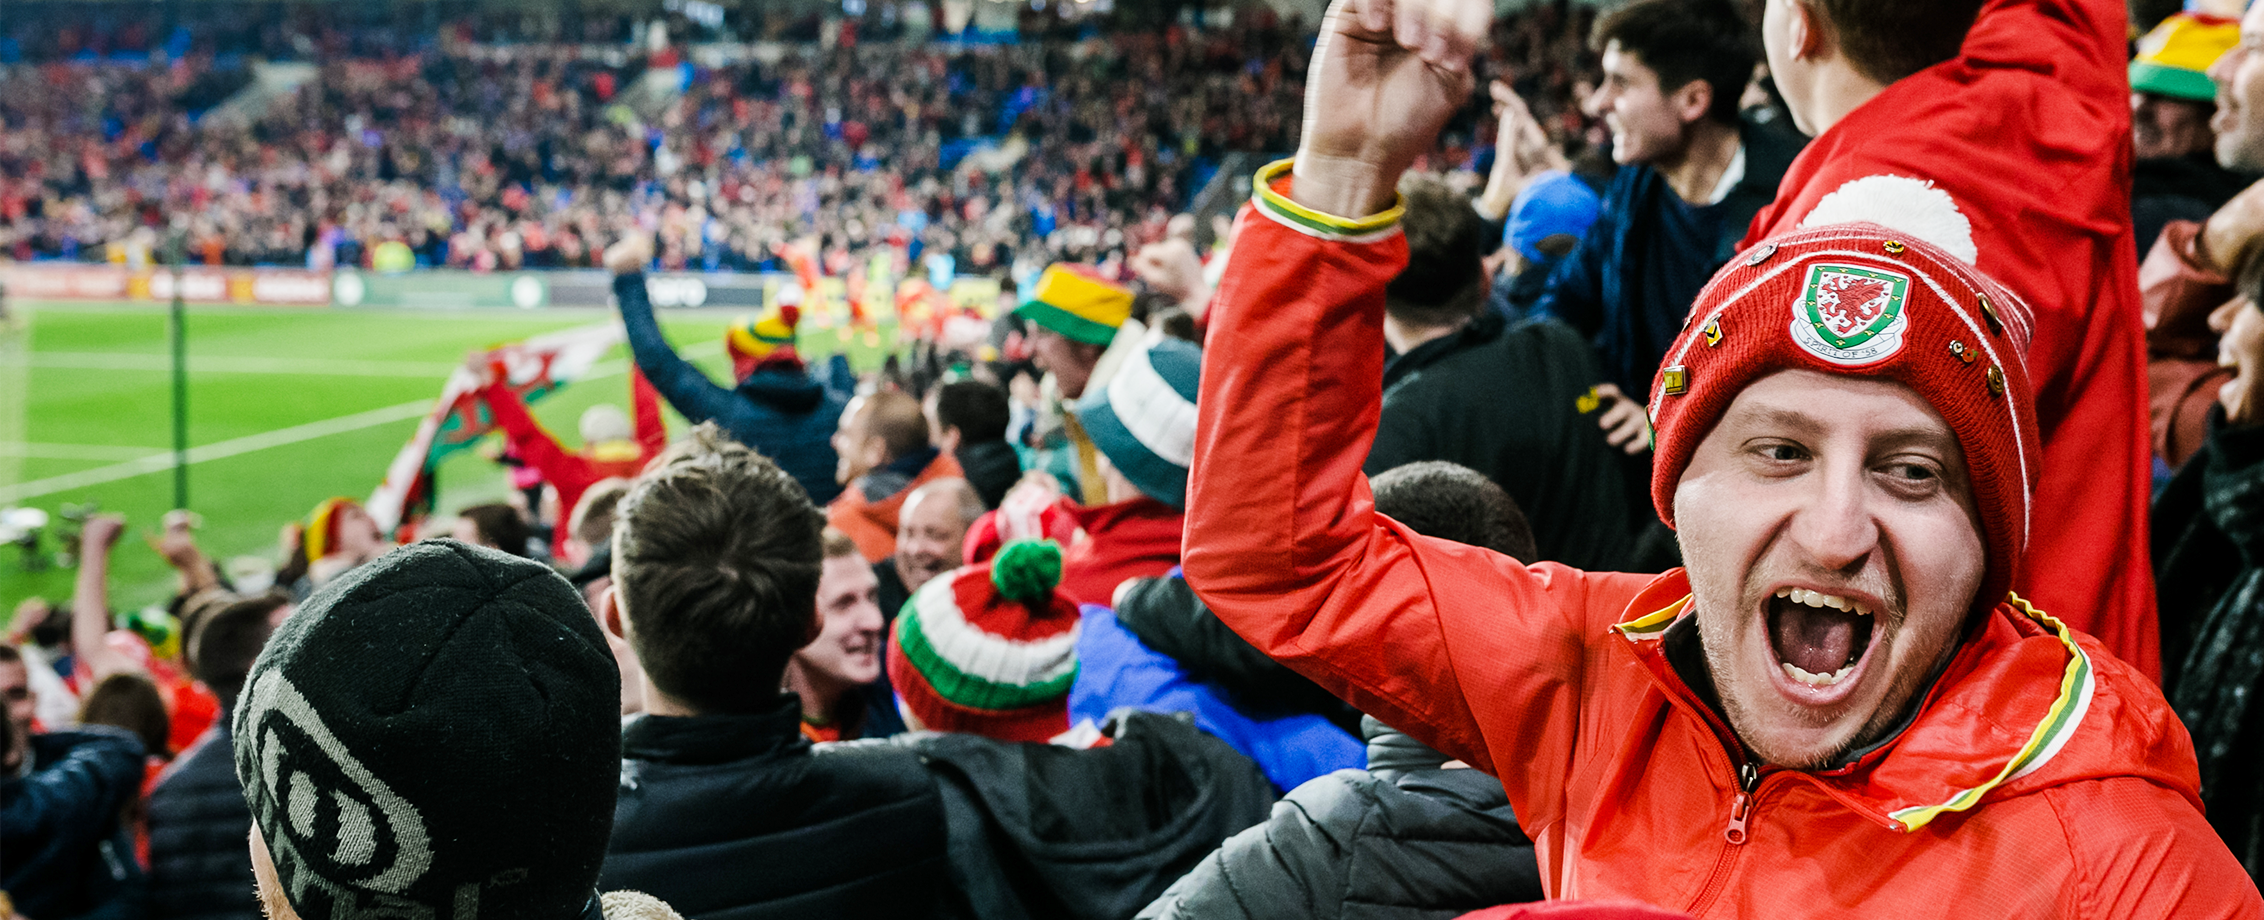 Welsh Fans celebrate during a Euro 2020 qualifier between Wales and Hungary at Cardiff City Stadium.